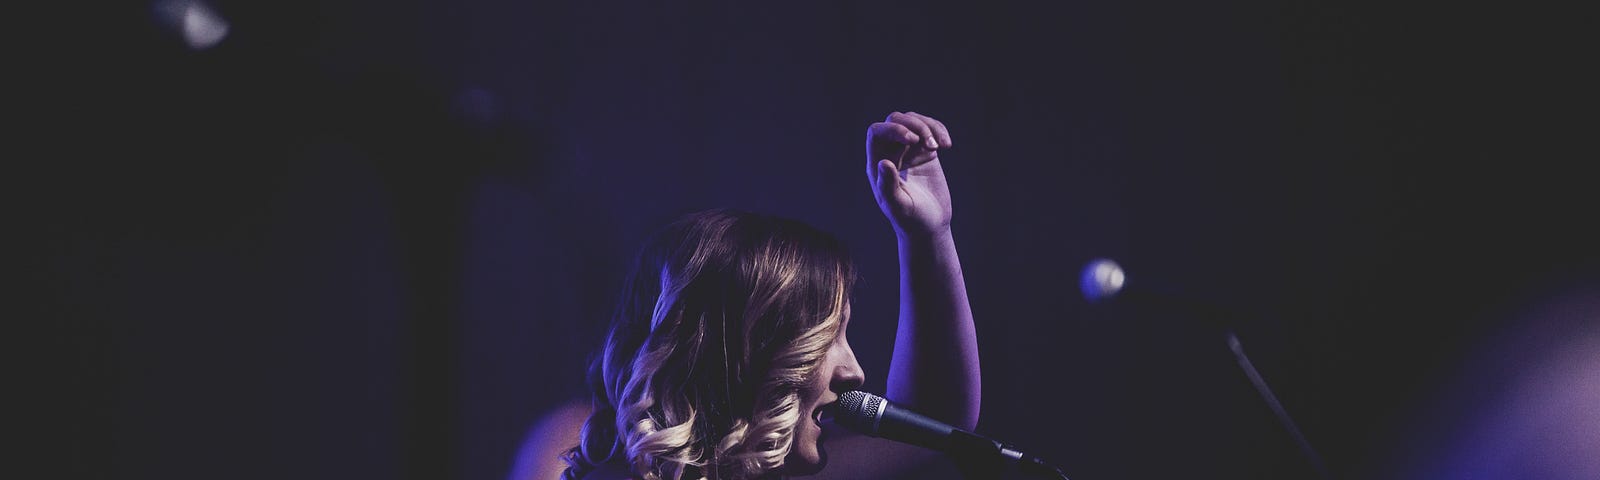 A dark background with a woman in purple in profile lifting one hand in worship while she sings into a mic on a stand.